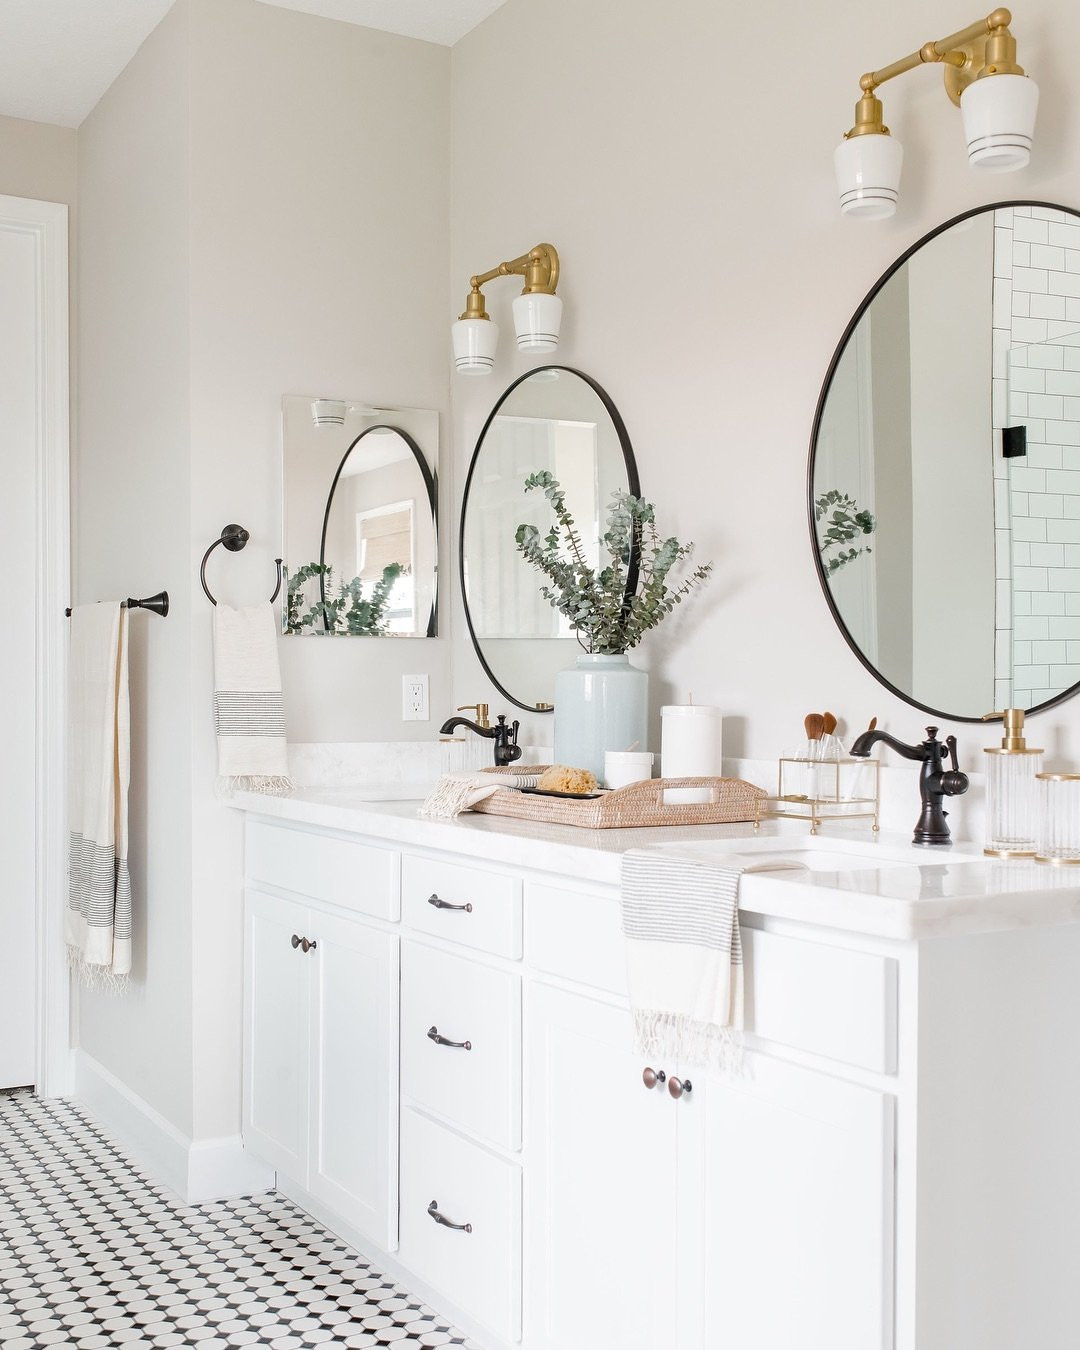 Bathroom Mirror Placement Over Vanity
 How To Proper Wall Sconce Placement